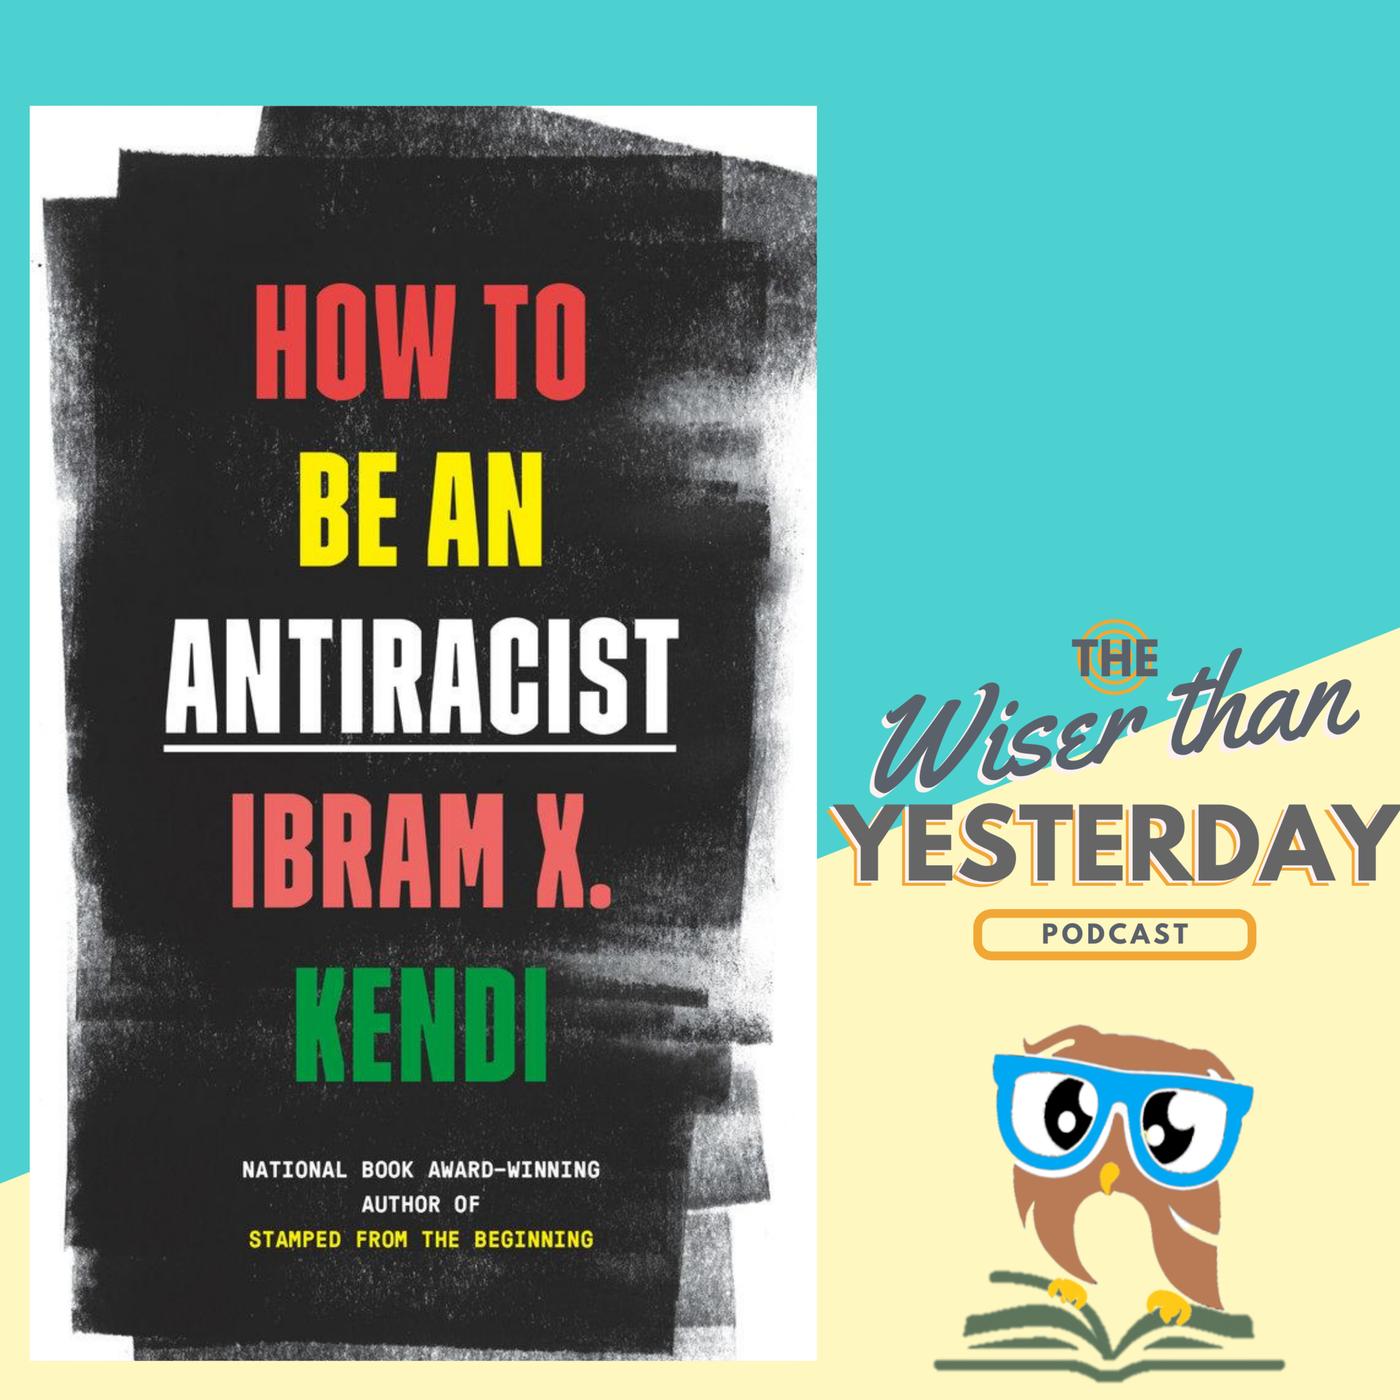 How to be an antiracist - Ibram X. Kendi